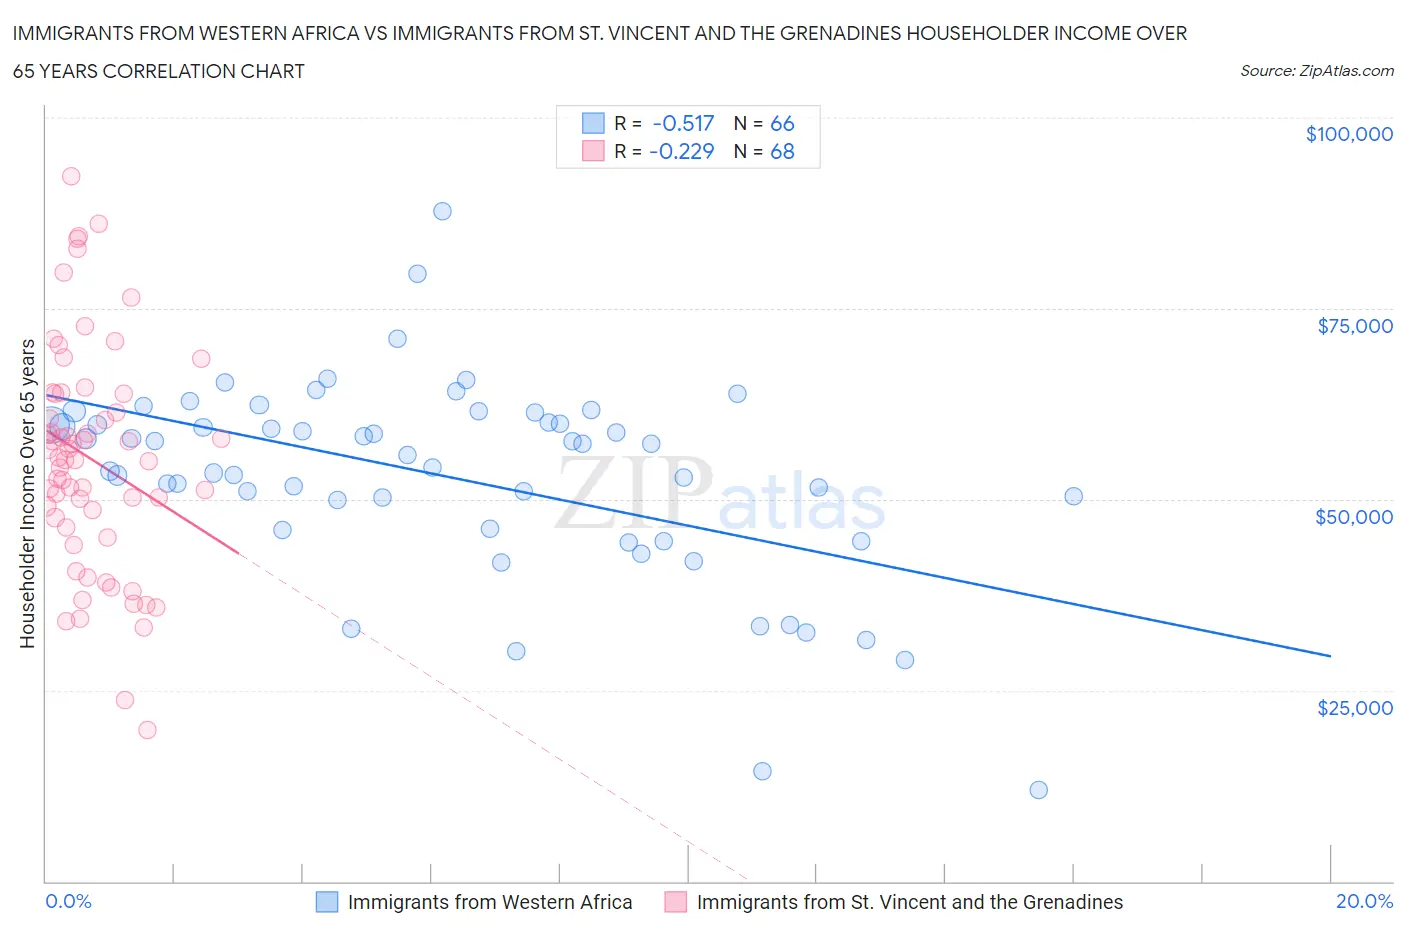 Immigrants from Western Africa vs Immigrants from St. Vincent and the Grenadines Householder Income Over 65 years